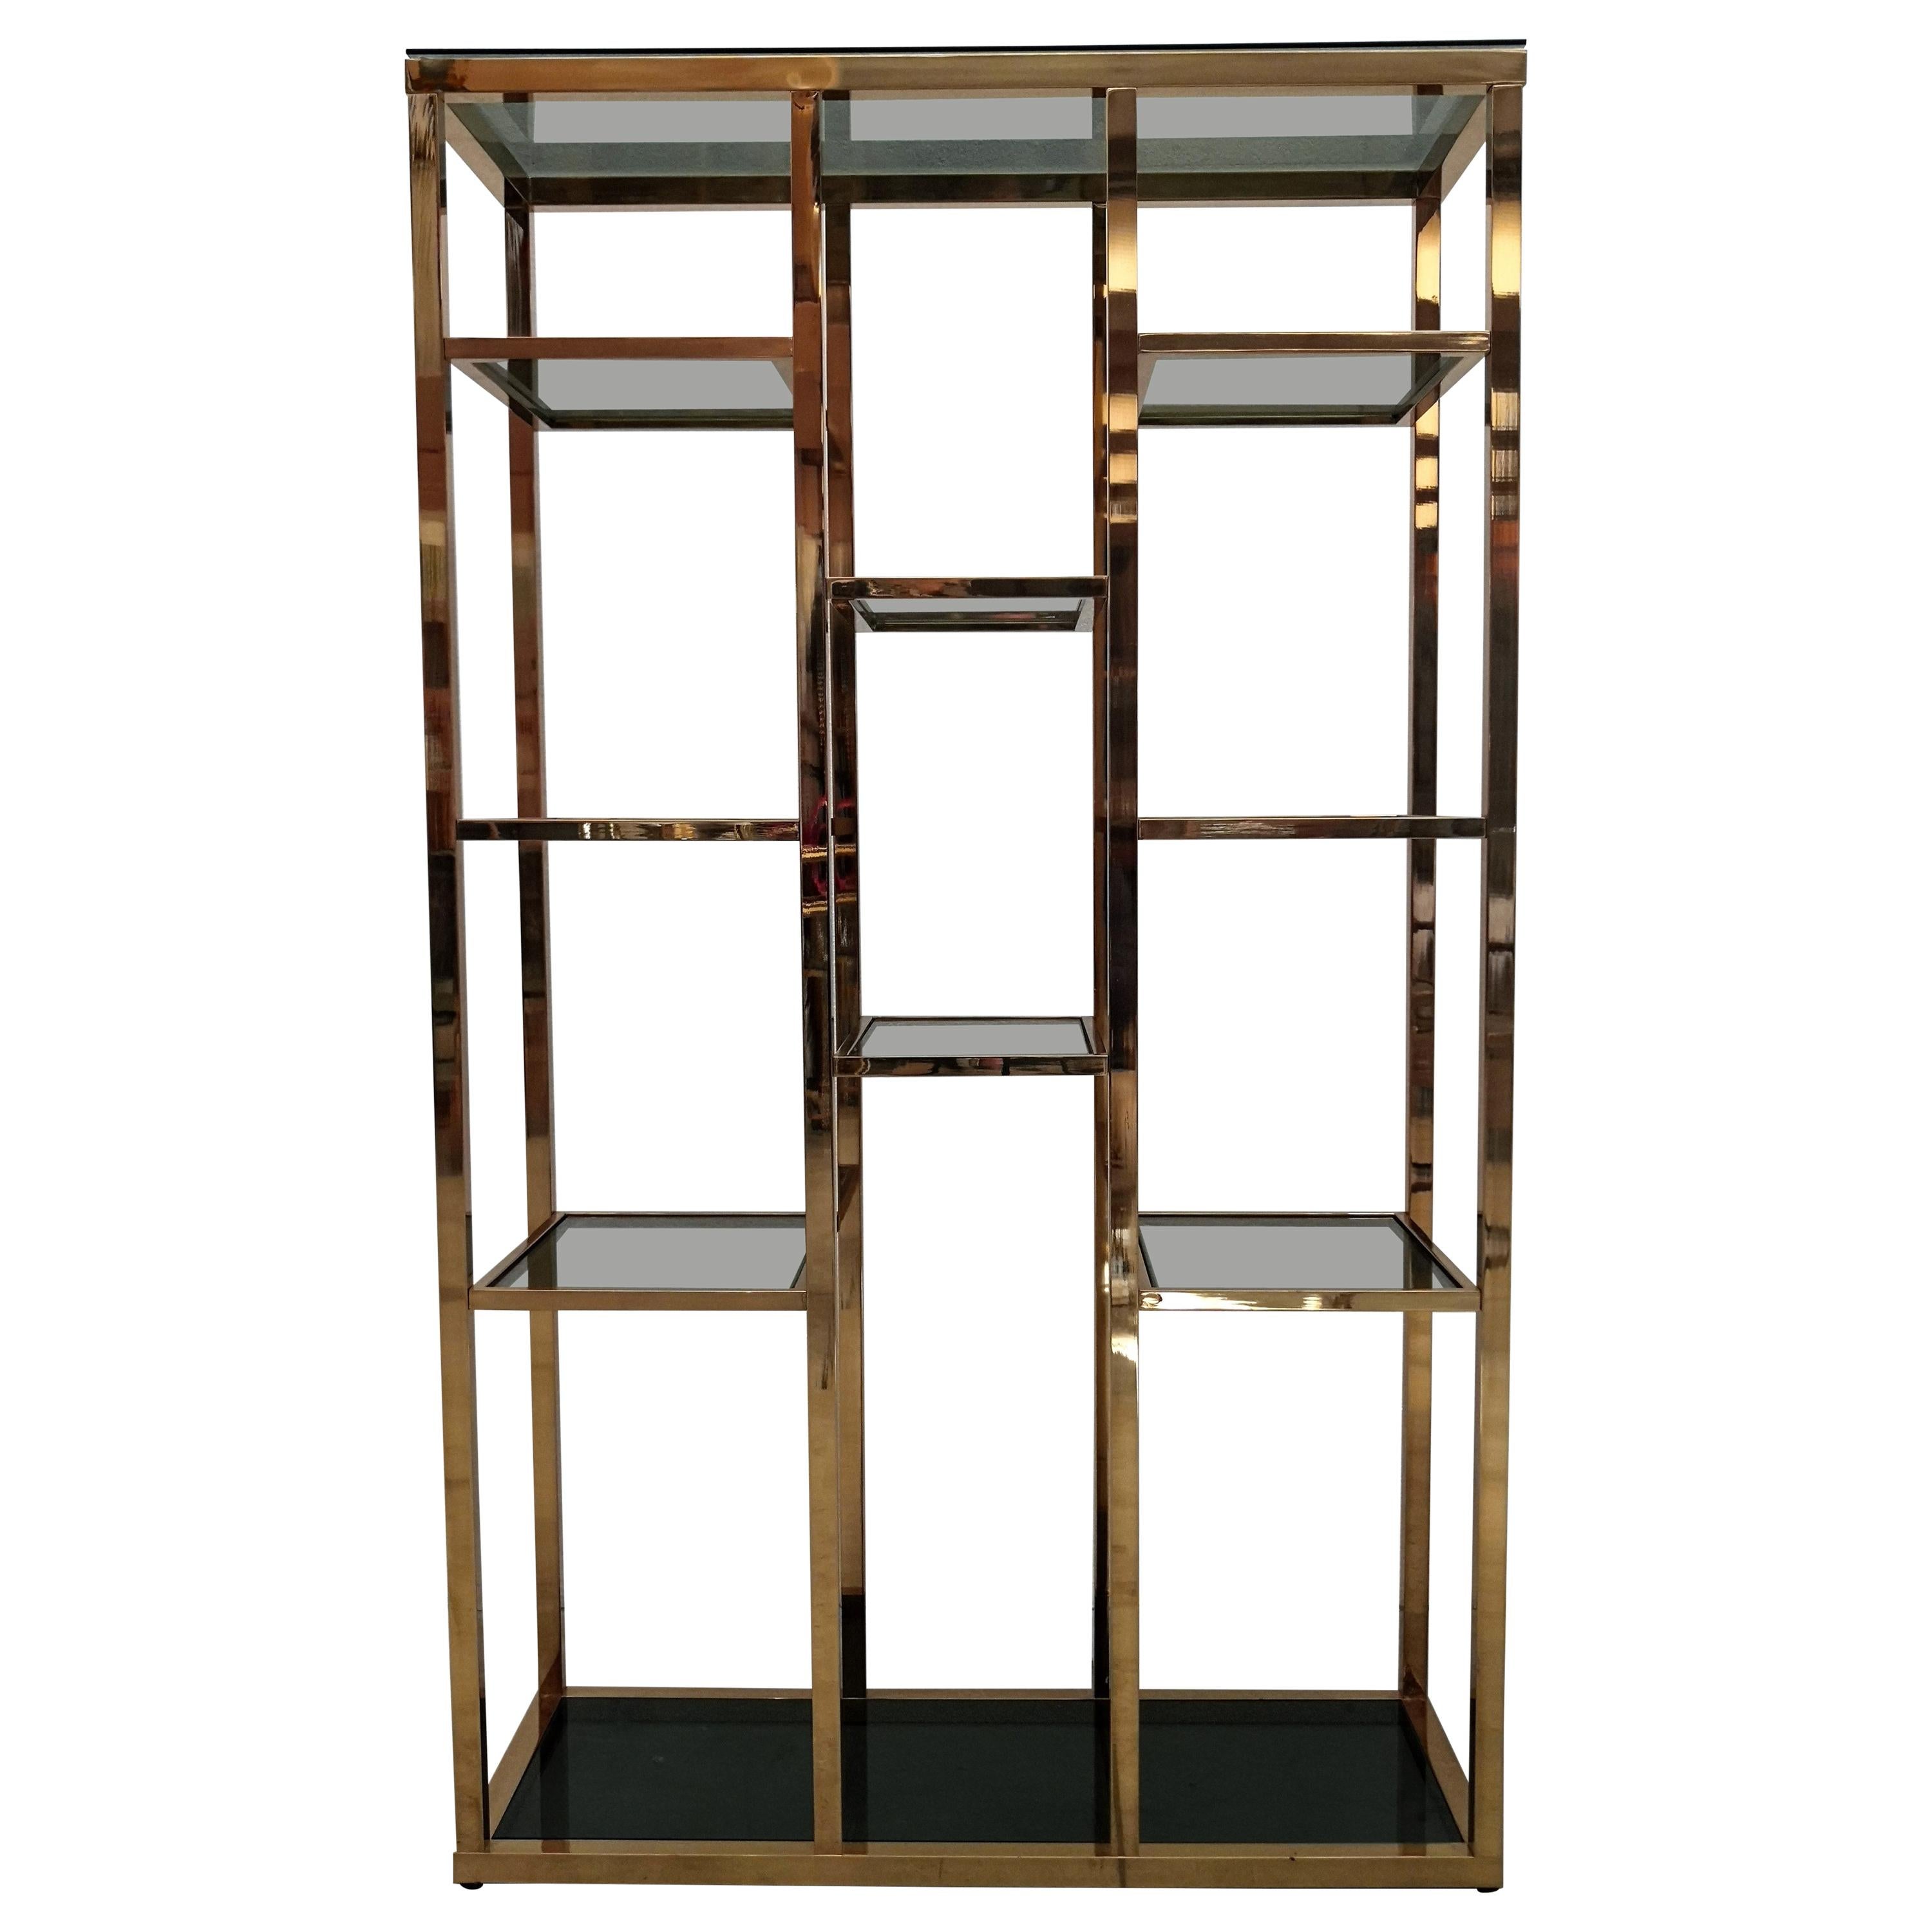 1970s Italian Hollywood Regency Brass and Green Glass Étagère Shelving Display